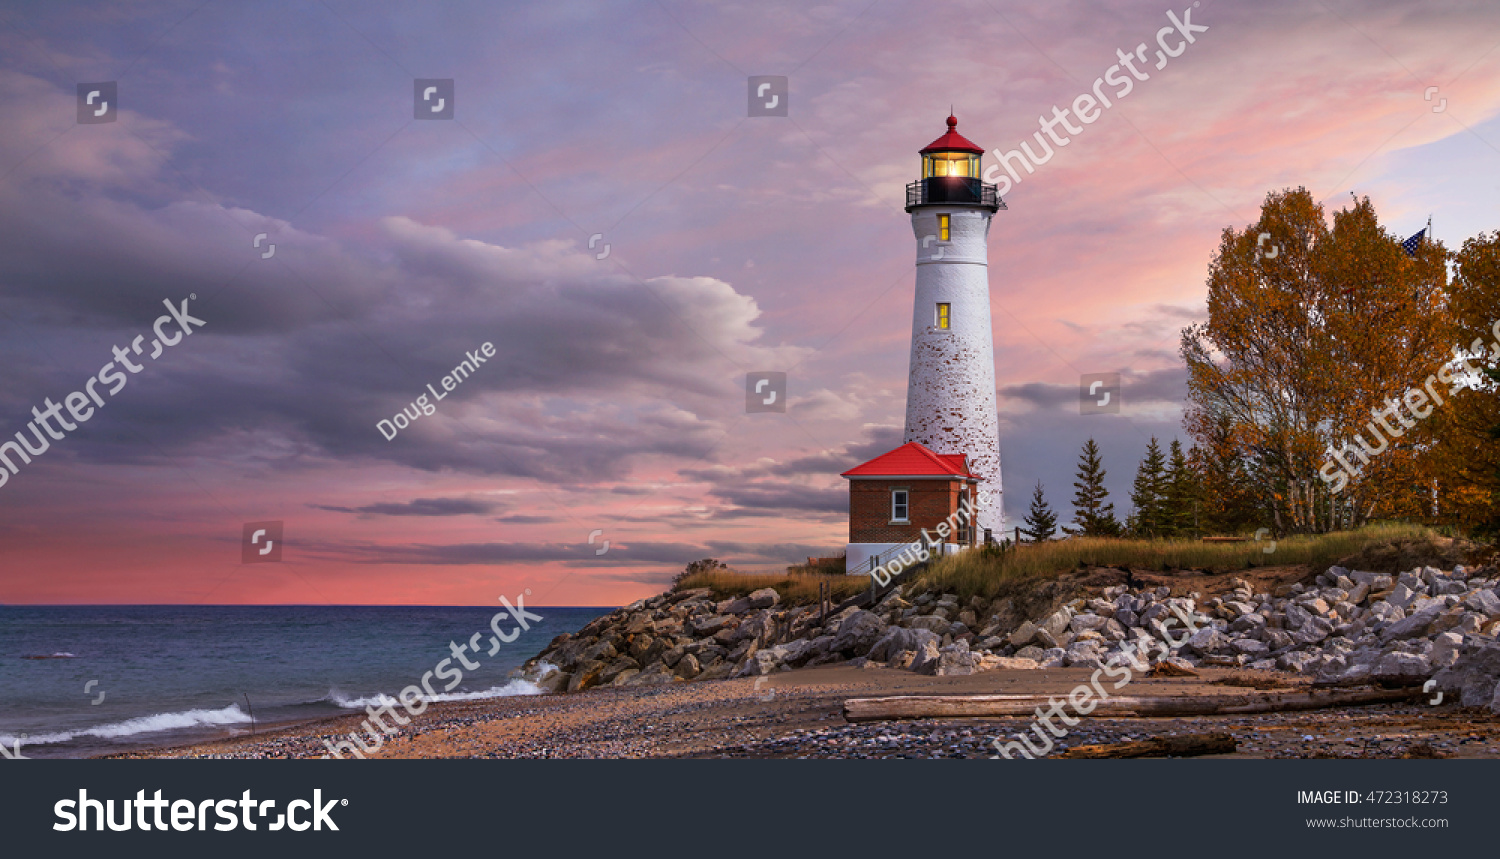 As daylight begins yielding to twilight, The Crisp Point Lighthouse at sunset on Lake Superior, Upper Peninsula, Michigan, USA - A one hour drive from Tahquamenon Falls, mostly dirt roads #472318273